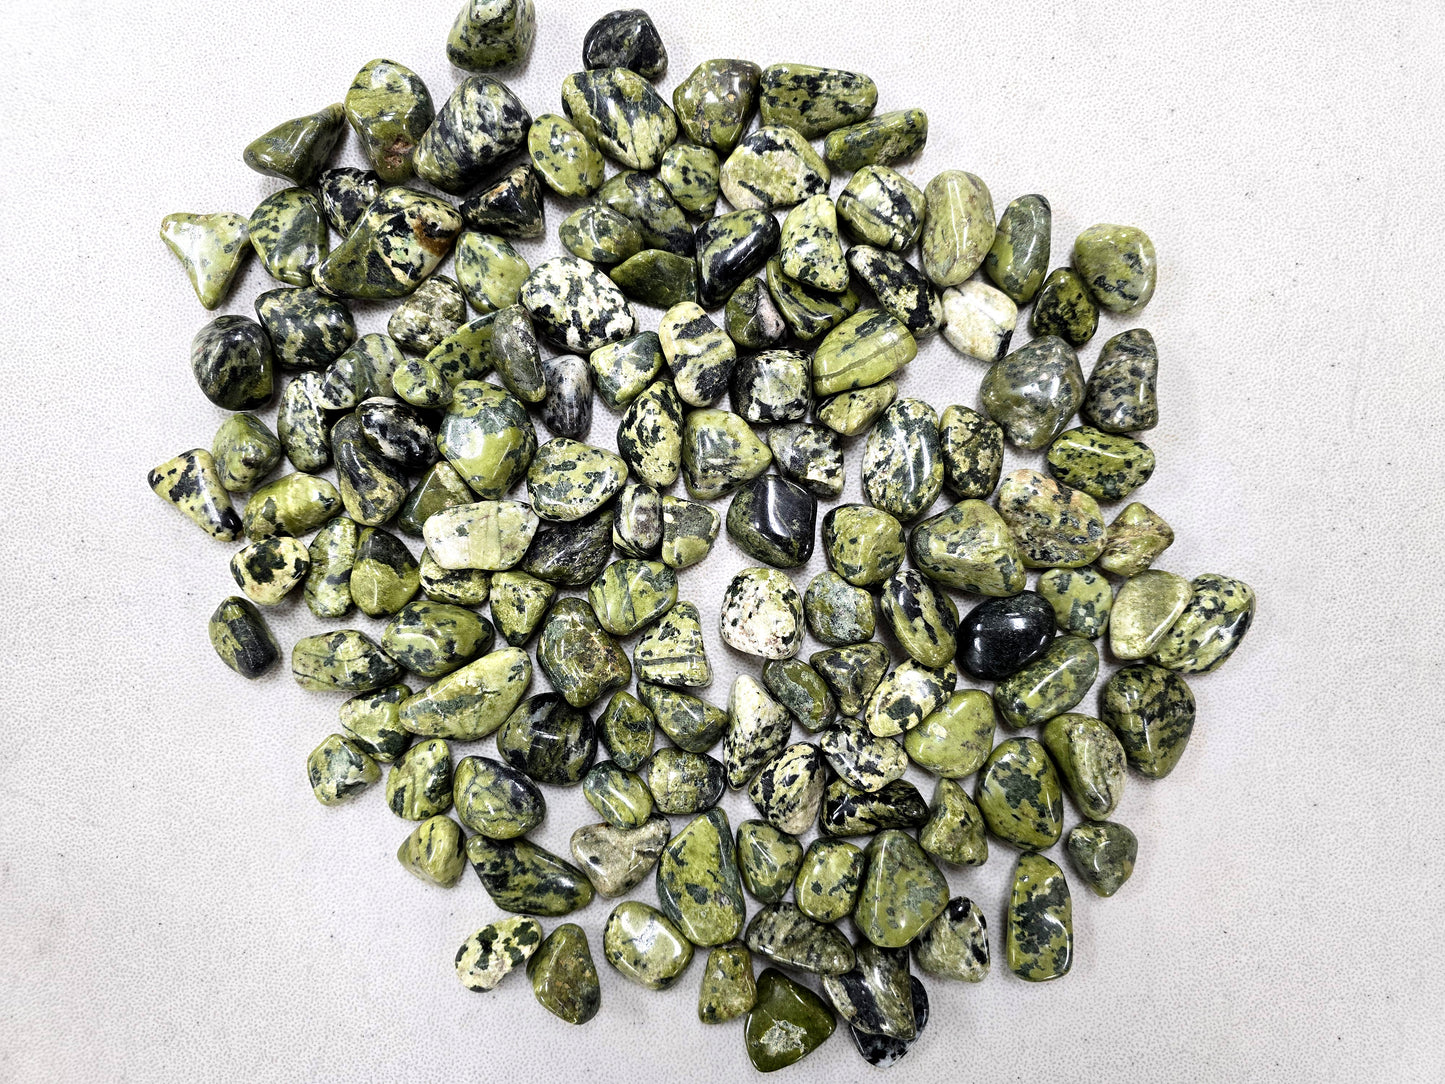 Tumbled Green Serpentine Crystal Stones from India